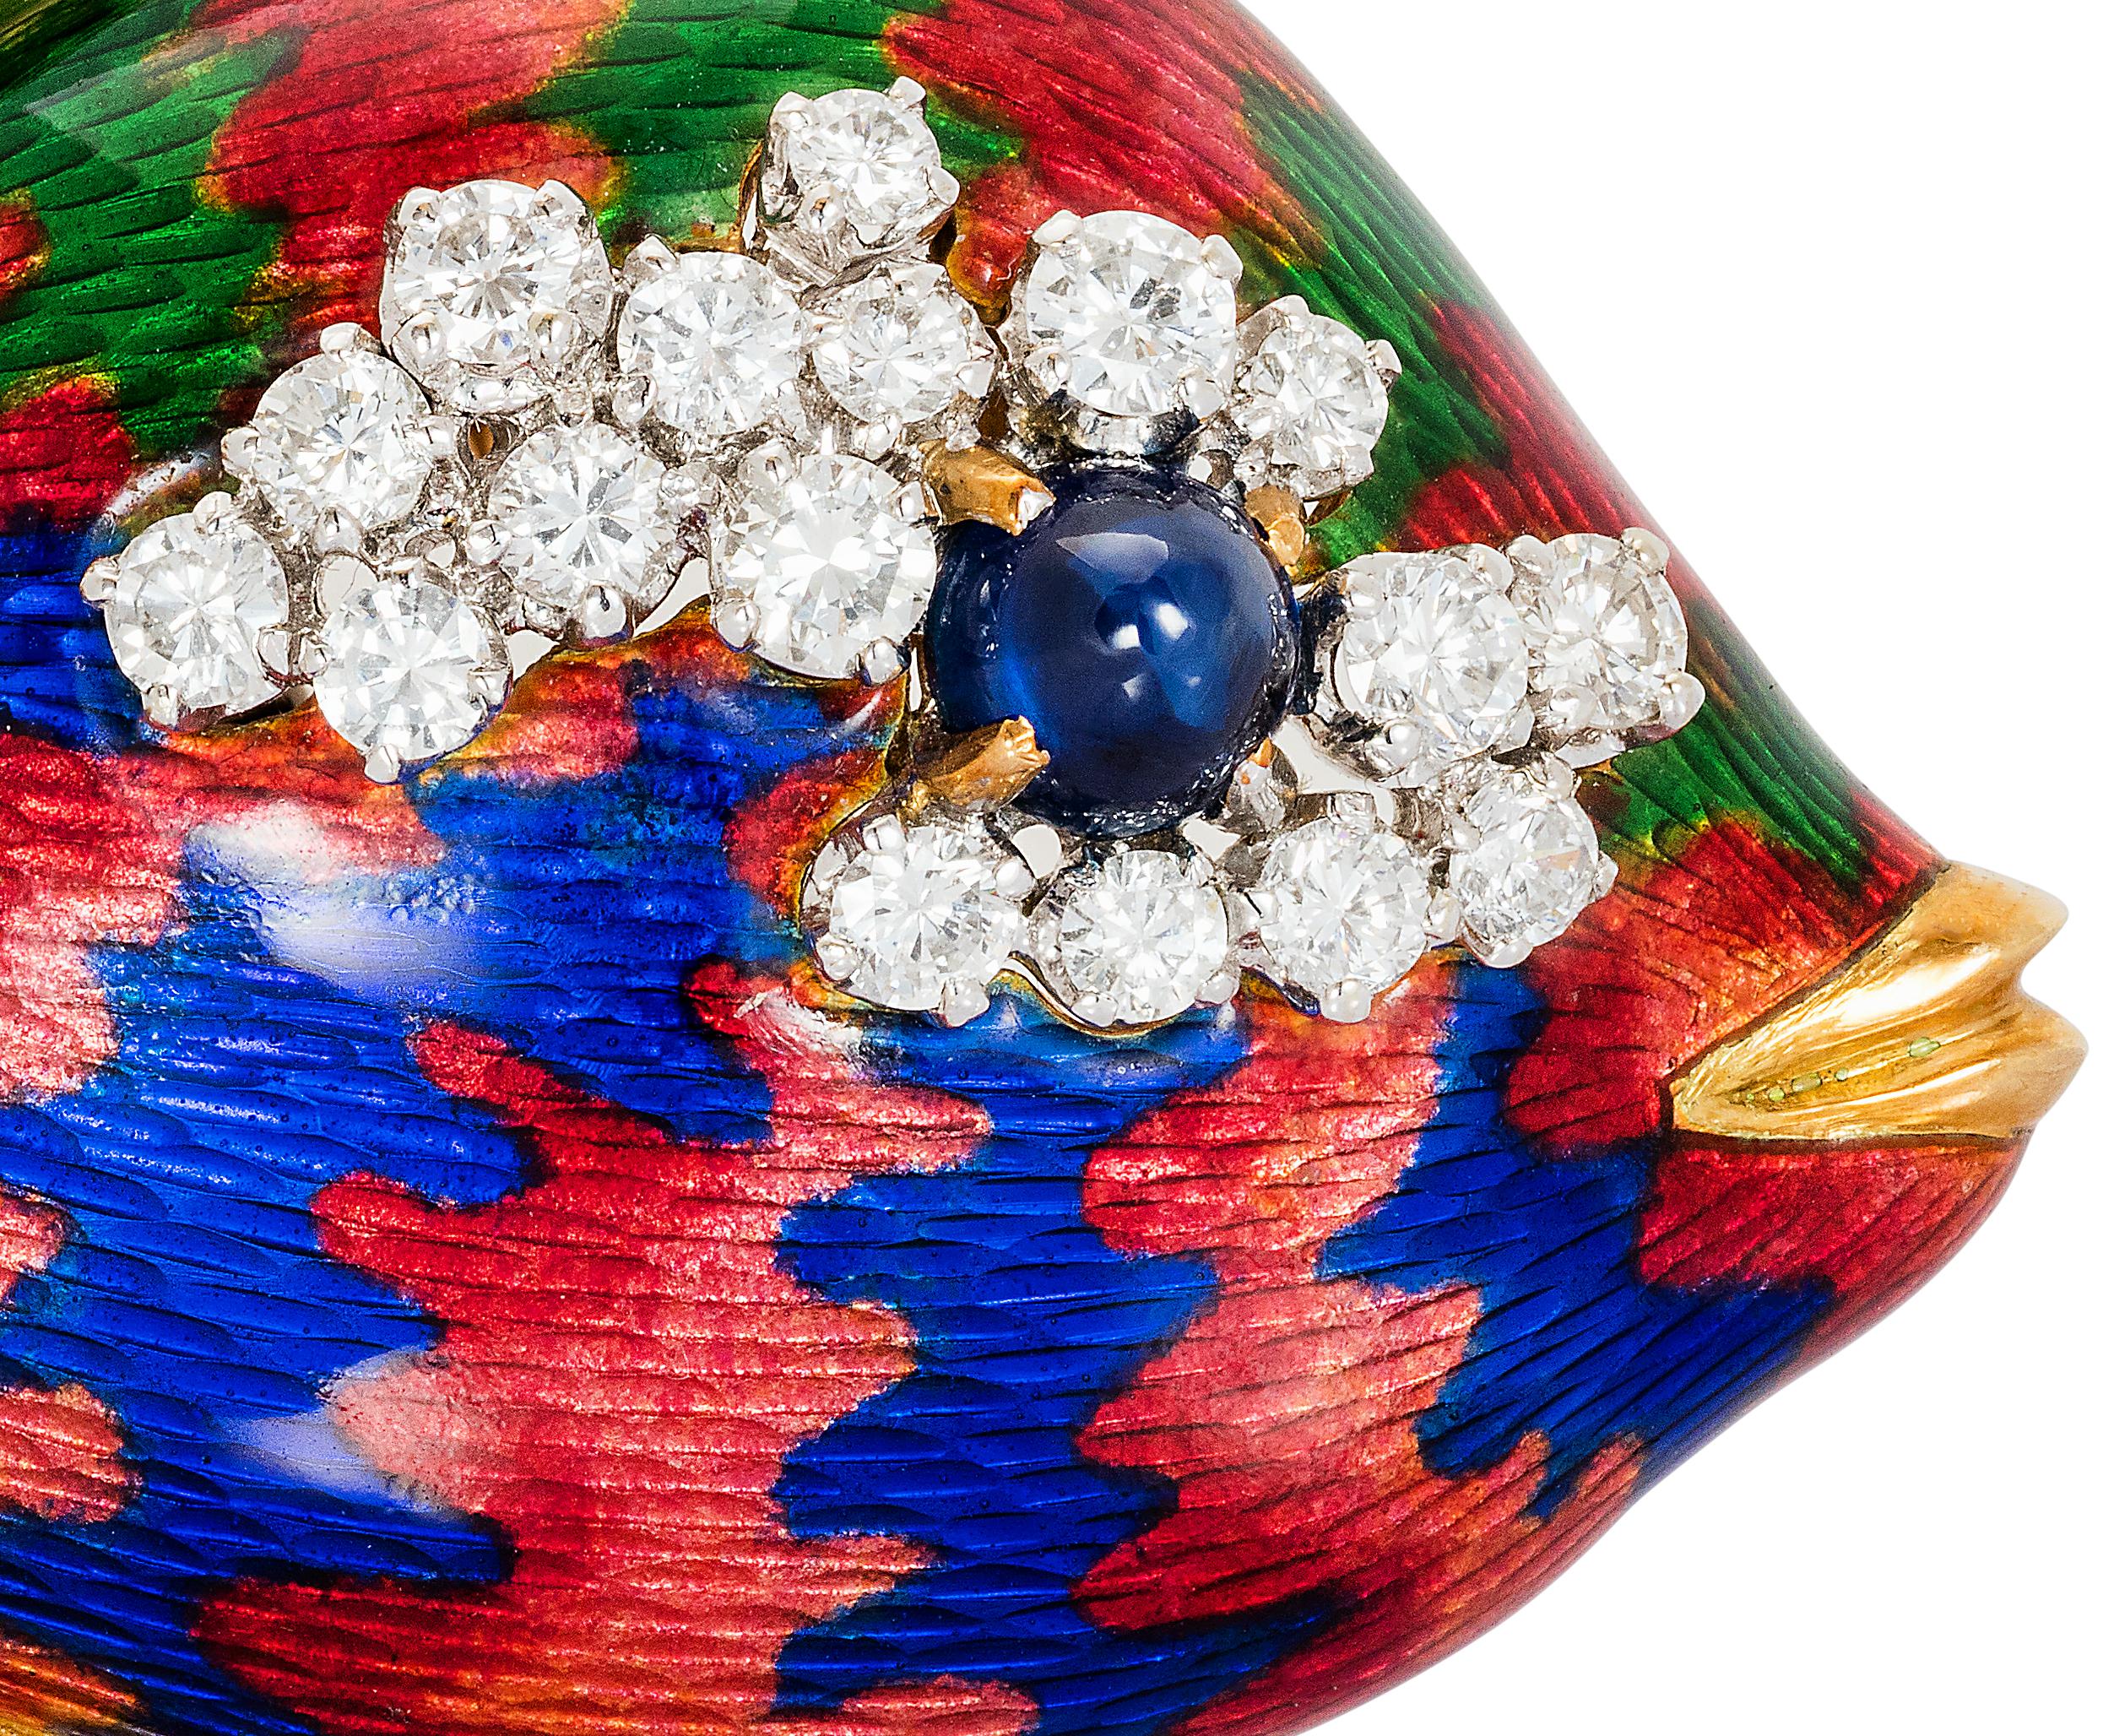 A whimsical fish brooch, fins and mouth made in carved yellow gold, body decorated with red, blue and green enamel. Cabochon sapphire eye surrounded by a cluster of diamonds. Circa 1970s.